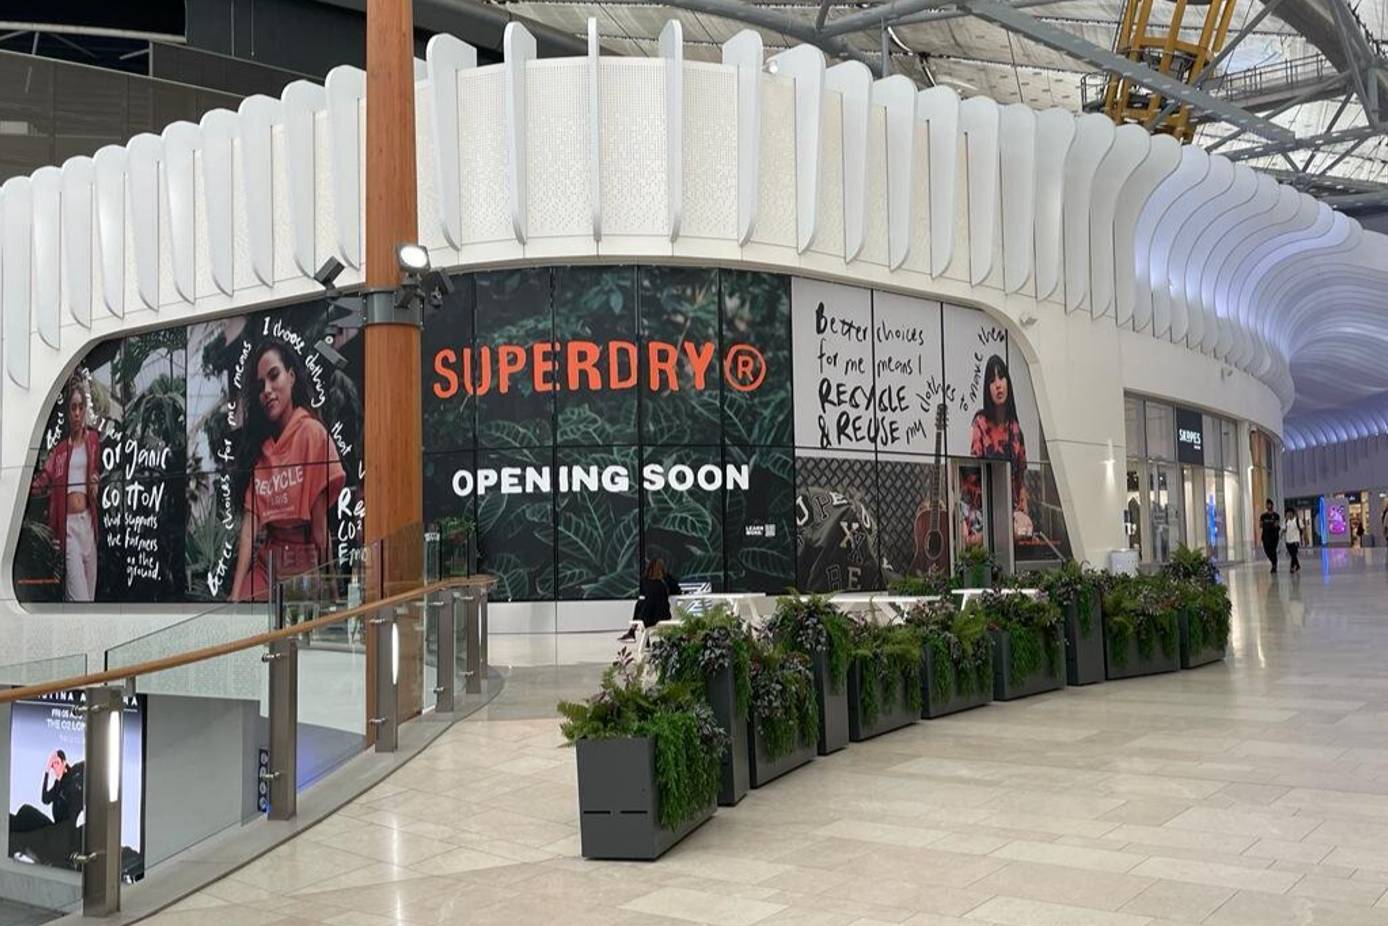 Former Superdry COO joins German activewear brand as CEO